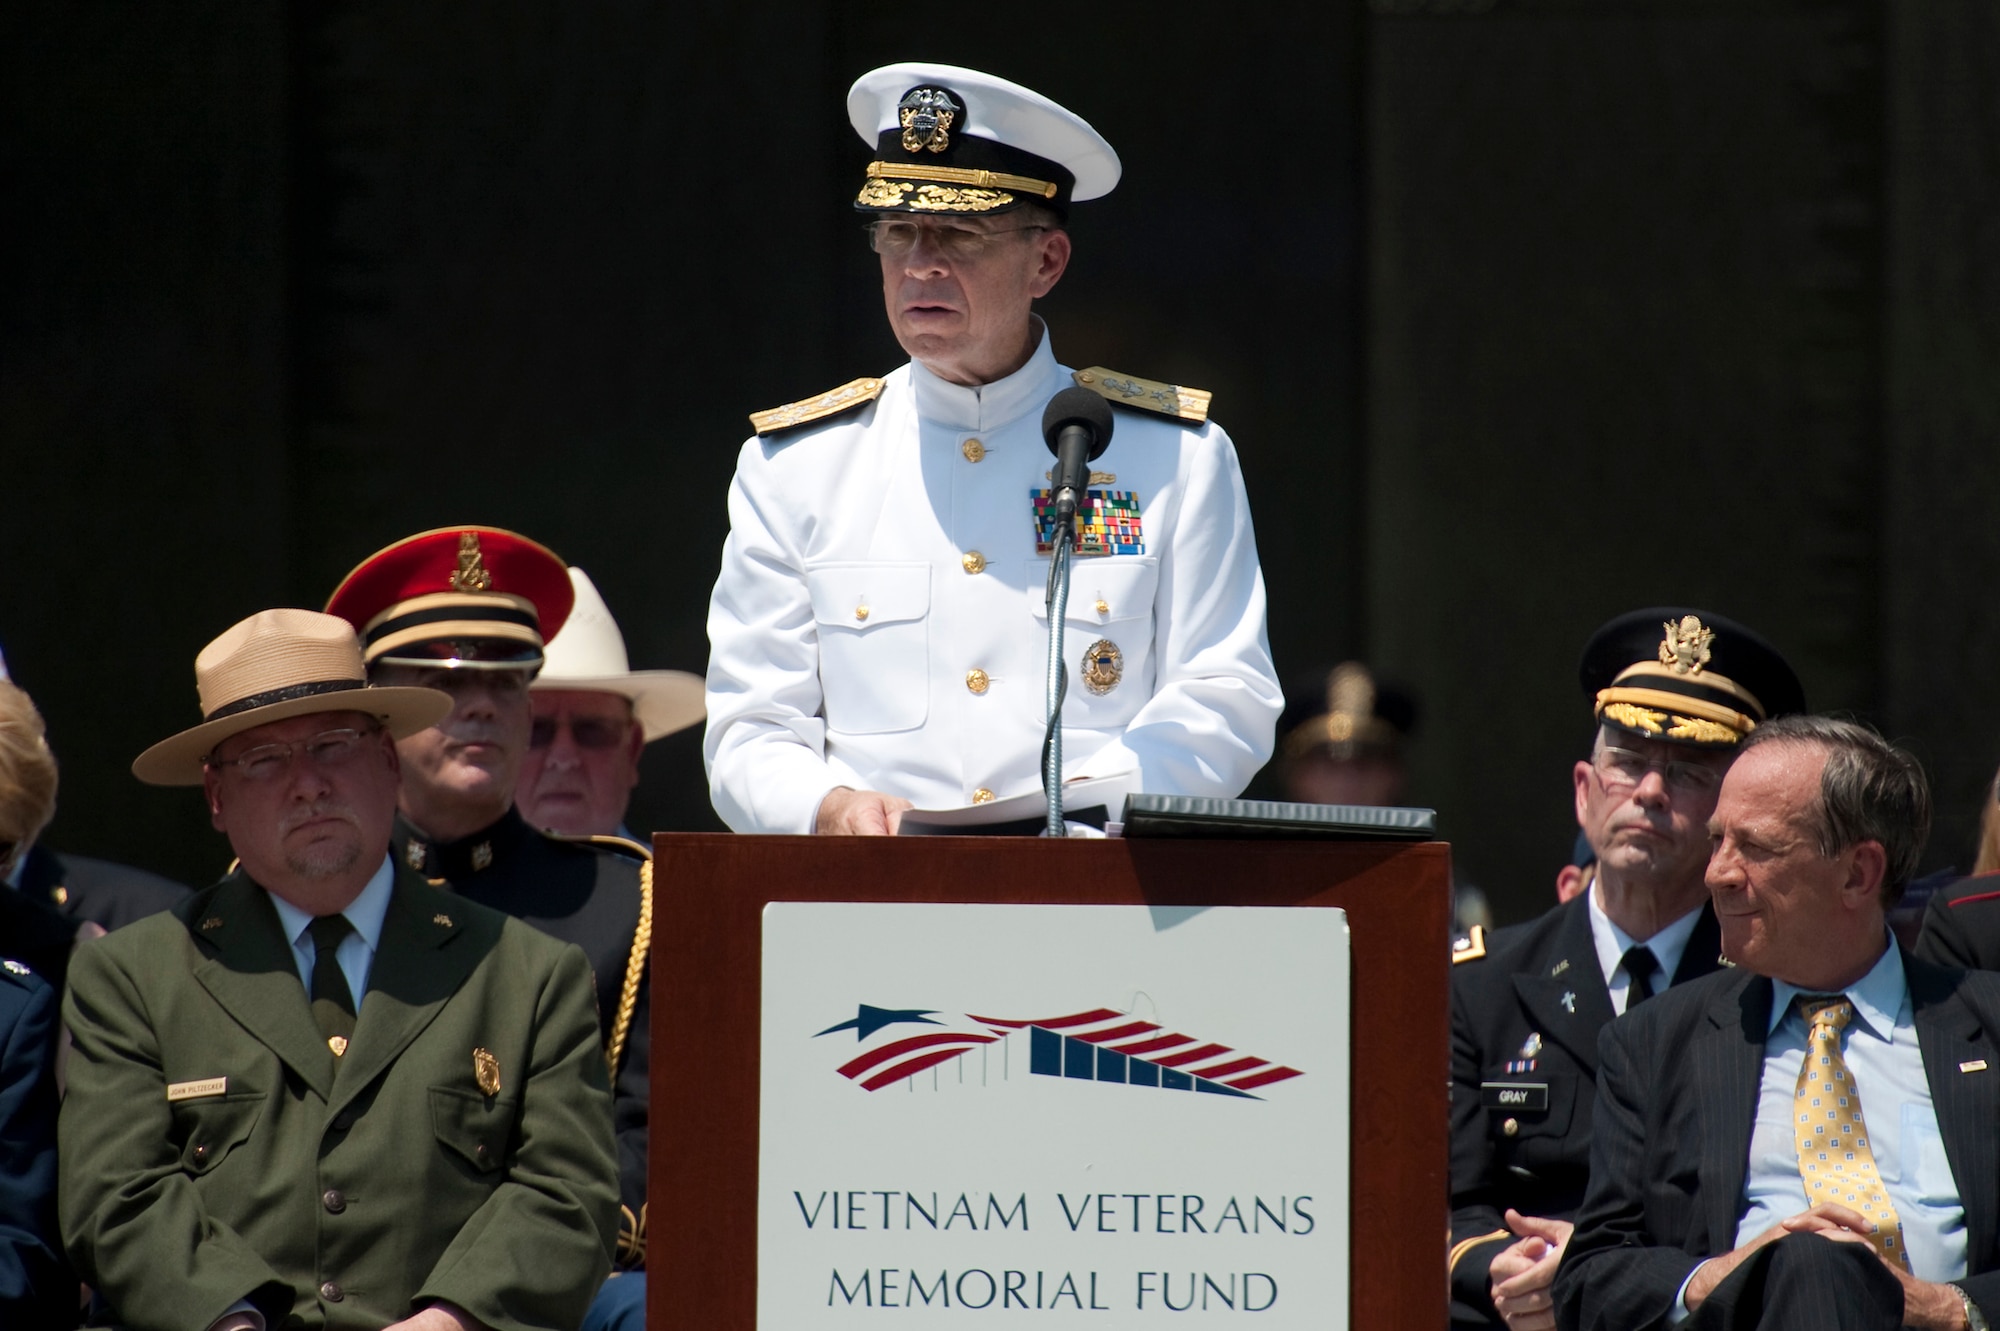 Adm. Mike Mullen, chairman of the Joint Chiefs of Staff, addresses audience members at the annual Memorial Day Observance Ceremony May 31, 2010, at the Vietnam Veterans Memorial in Washington, D.C.  Admiral Mullen gave the keynote address and recognized the addition of six new names to the more than 58,000 service members who perished in that war. (Defense Department photo/Petty Officer 1st Class Chad J. McNeeley)